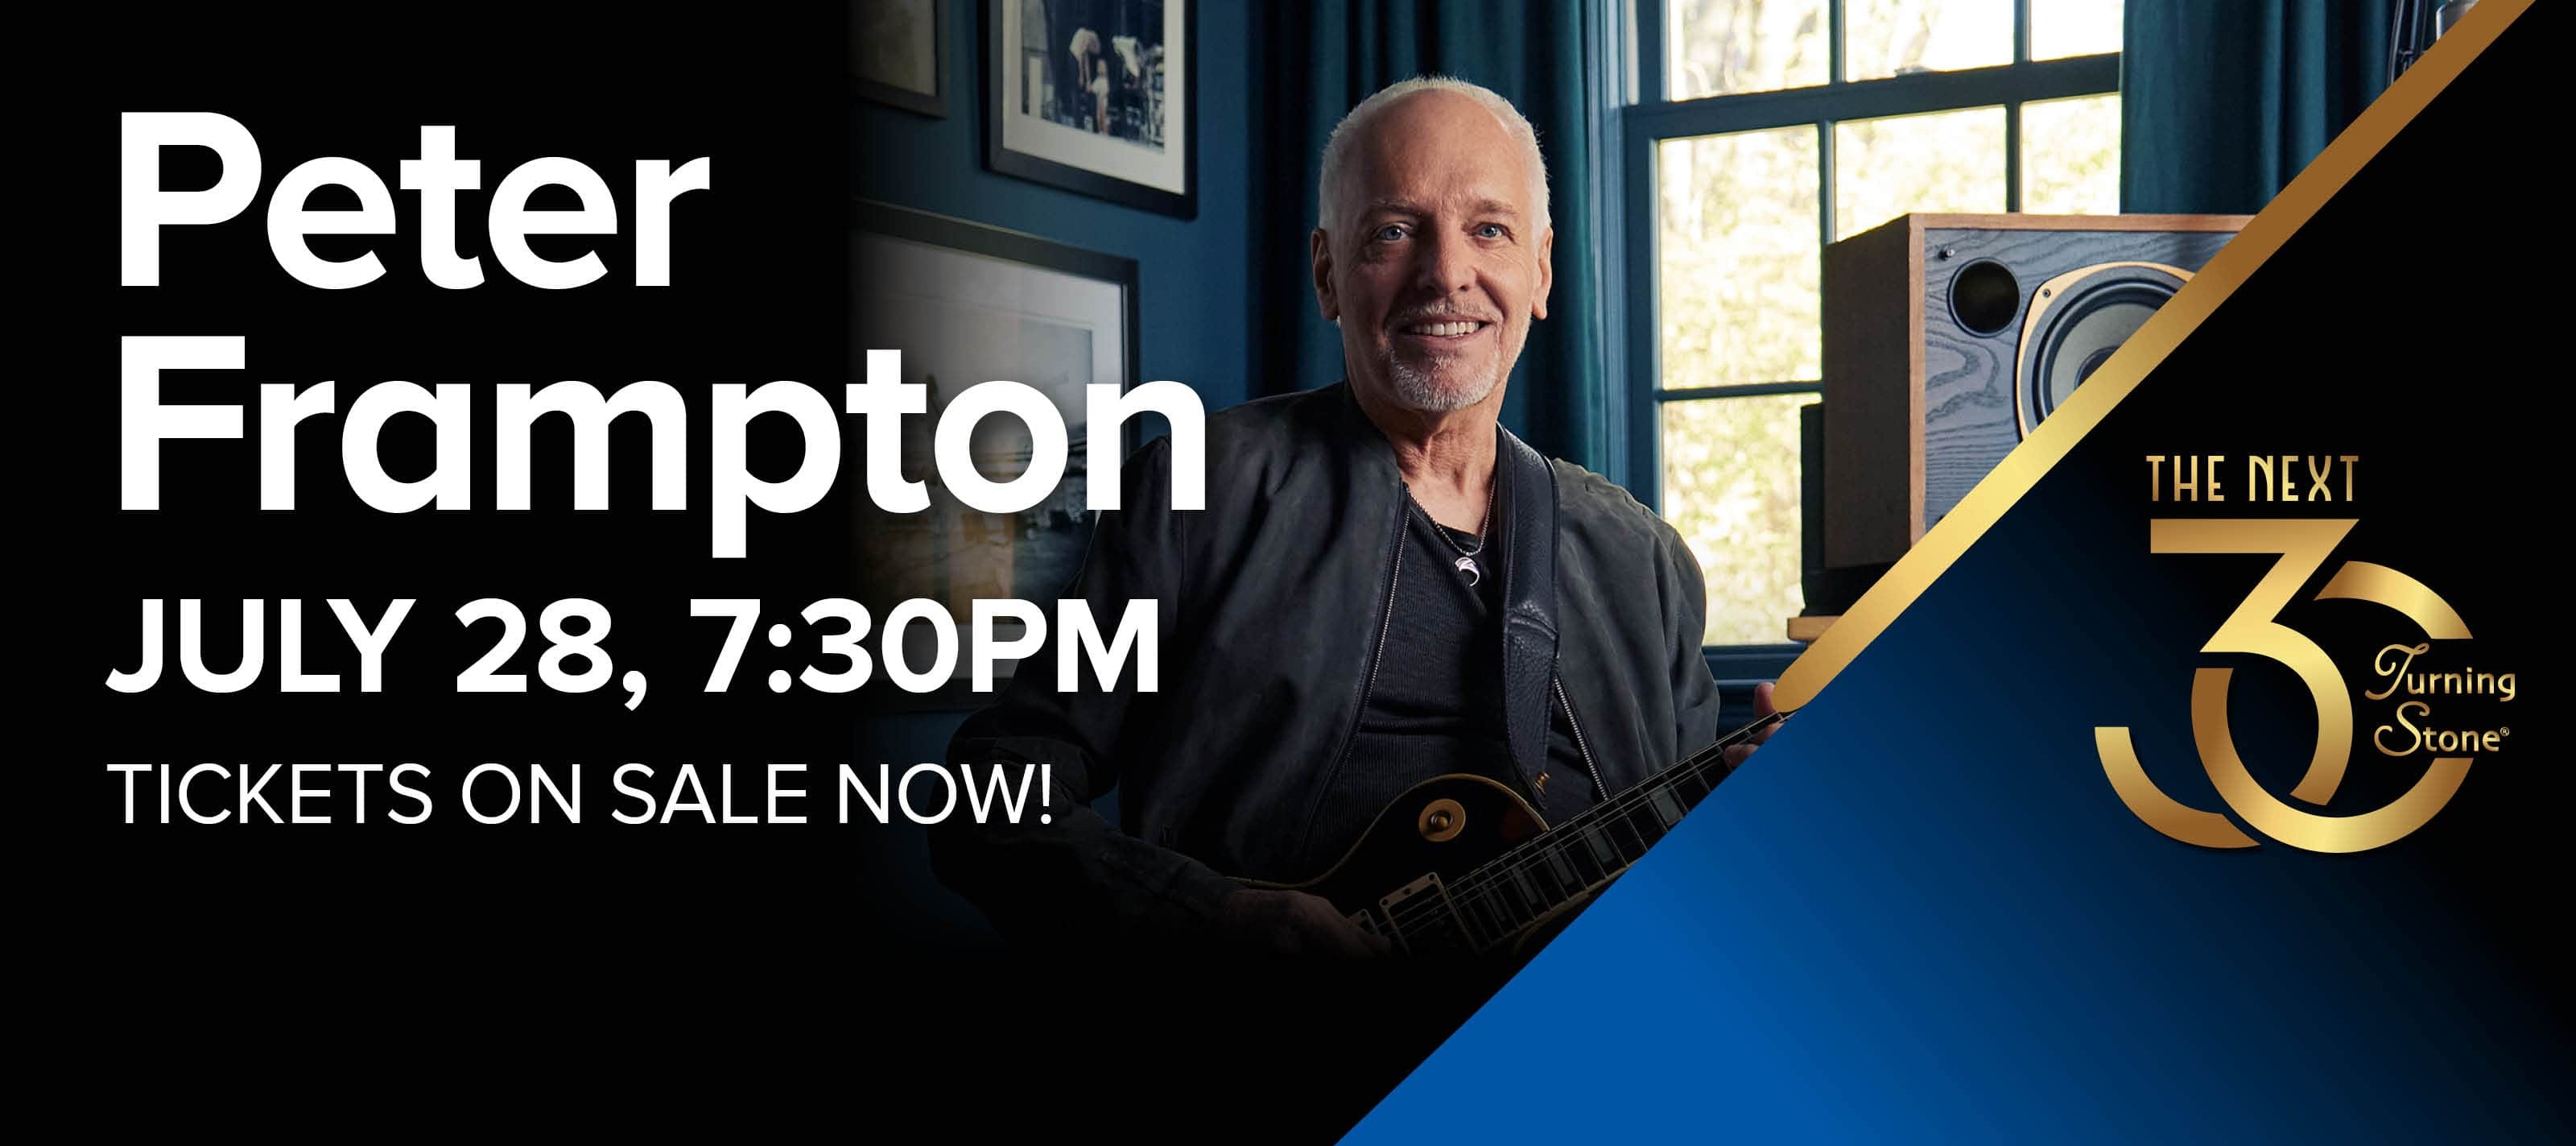 Peter Frampton July 28 7:30pm Tickets On Sale Now